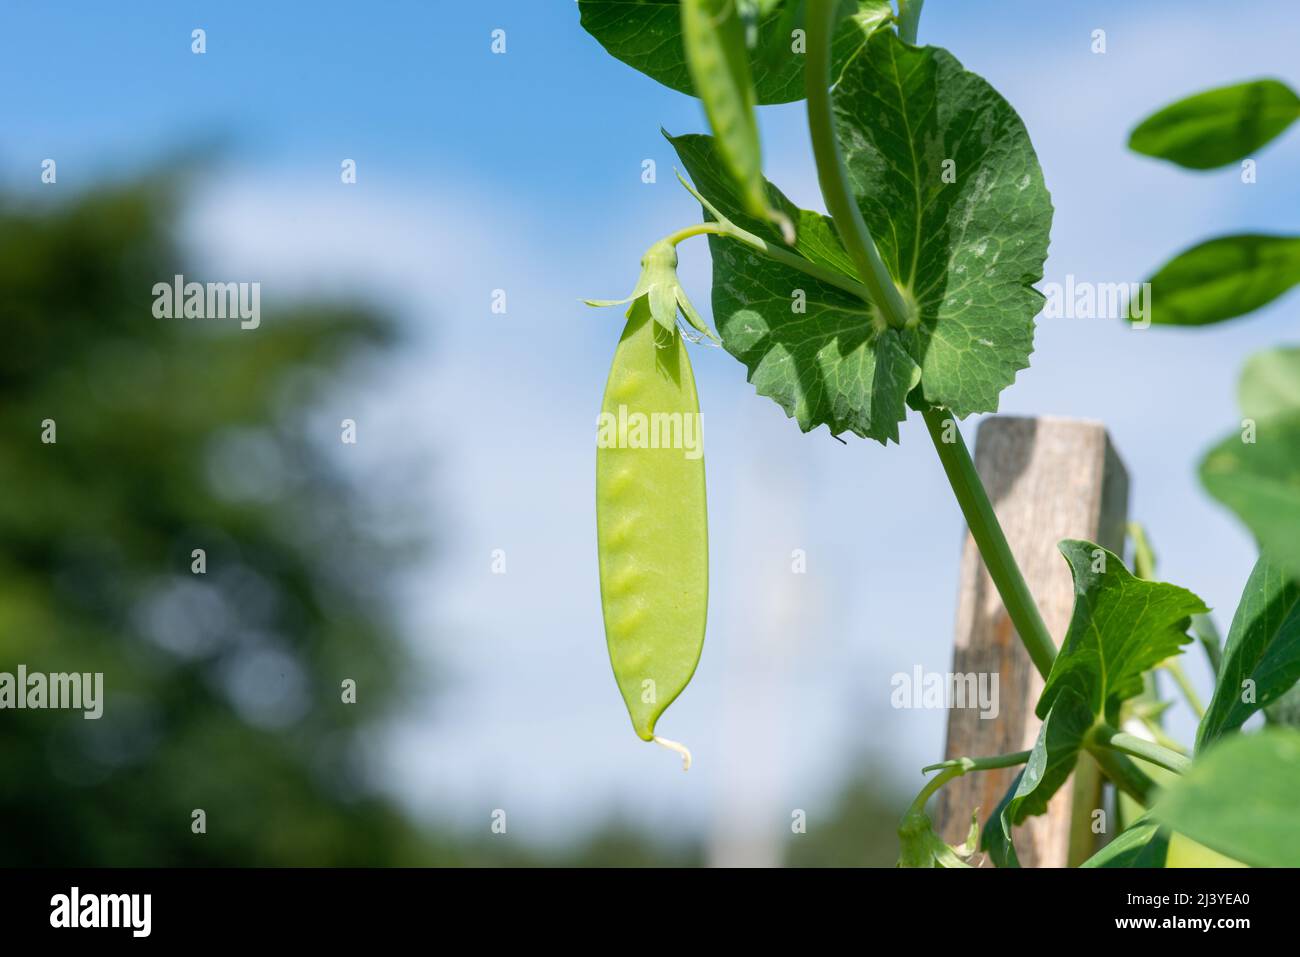 Vibrant green sweet pea pods growing on a vine on a farm. The raw organic string beans are hanging on cultivated plants surrounded by lush leaves. Stock Photo